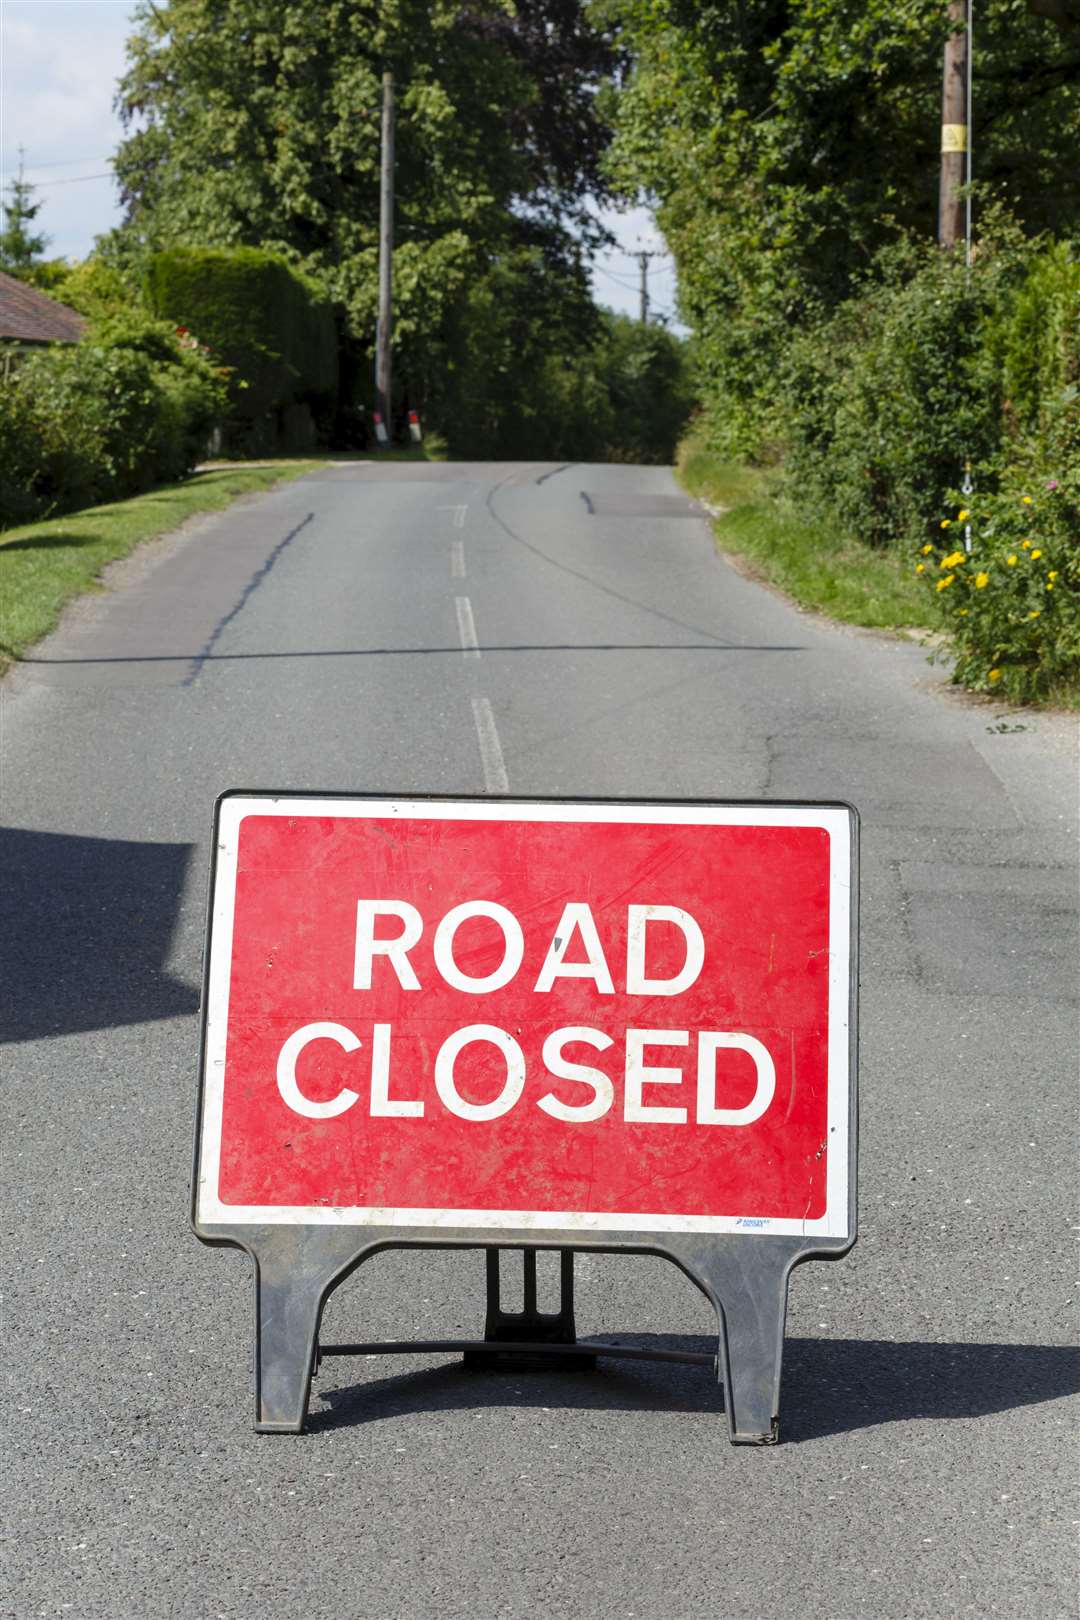 The road will be closed between Dufftown and Rhynie at Blackwater Bridge.